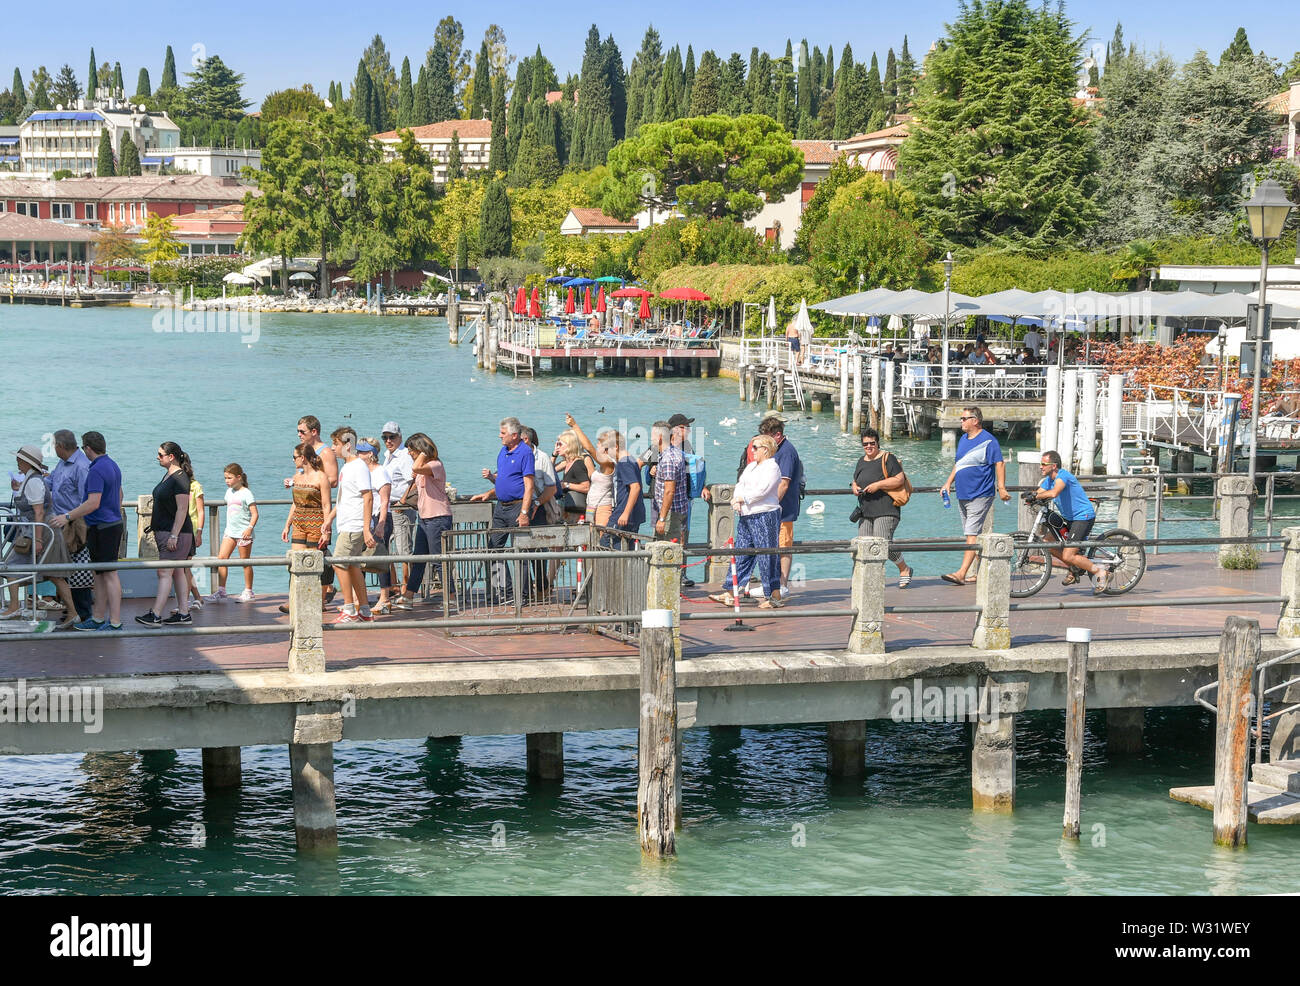 SIRMIONE, LAKE GARDA, ITALY - SEPTEMBER 2018: Queue of people waiting to board a ferry at the harbour of the resort of Sirmione on Lake Garda. Stock Photo